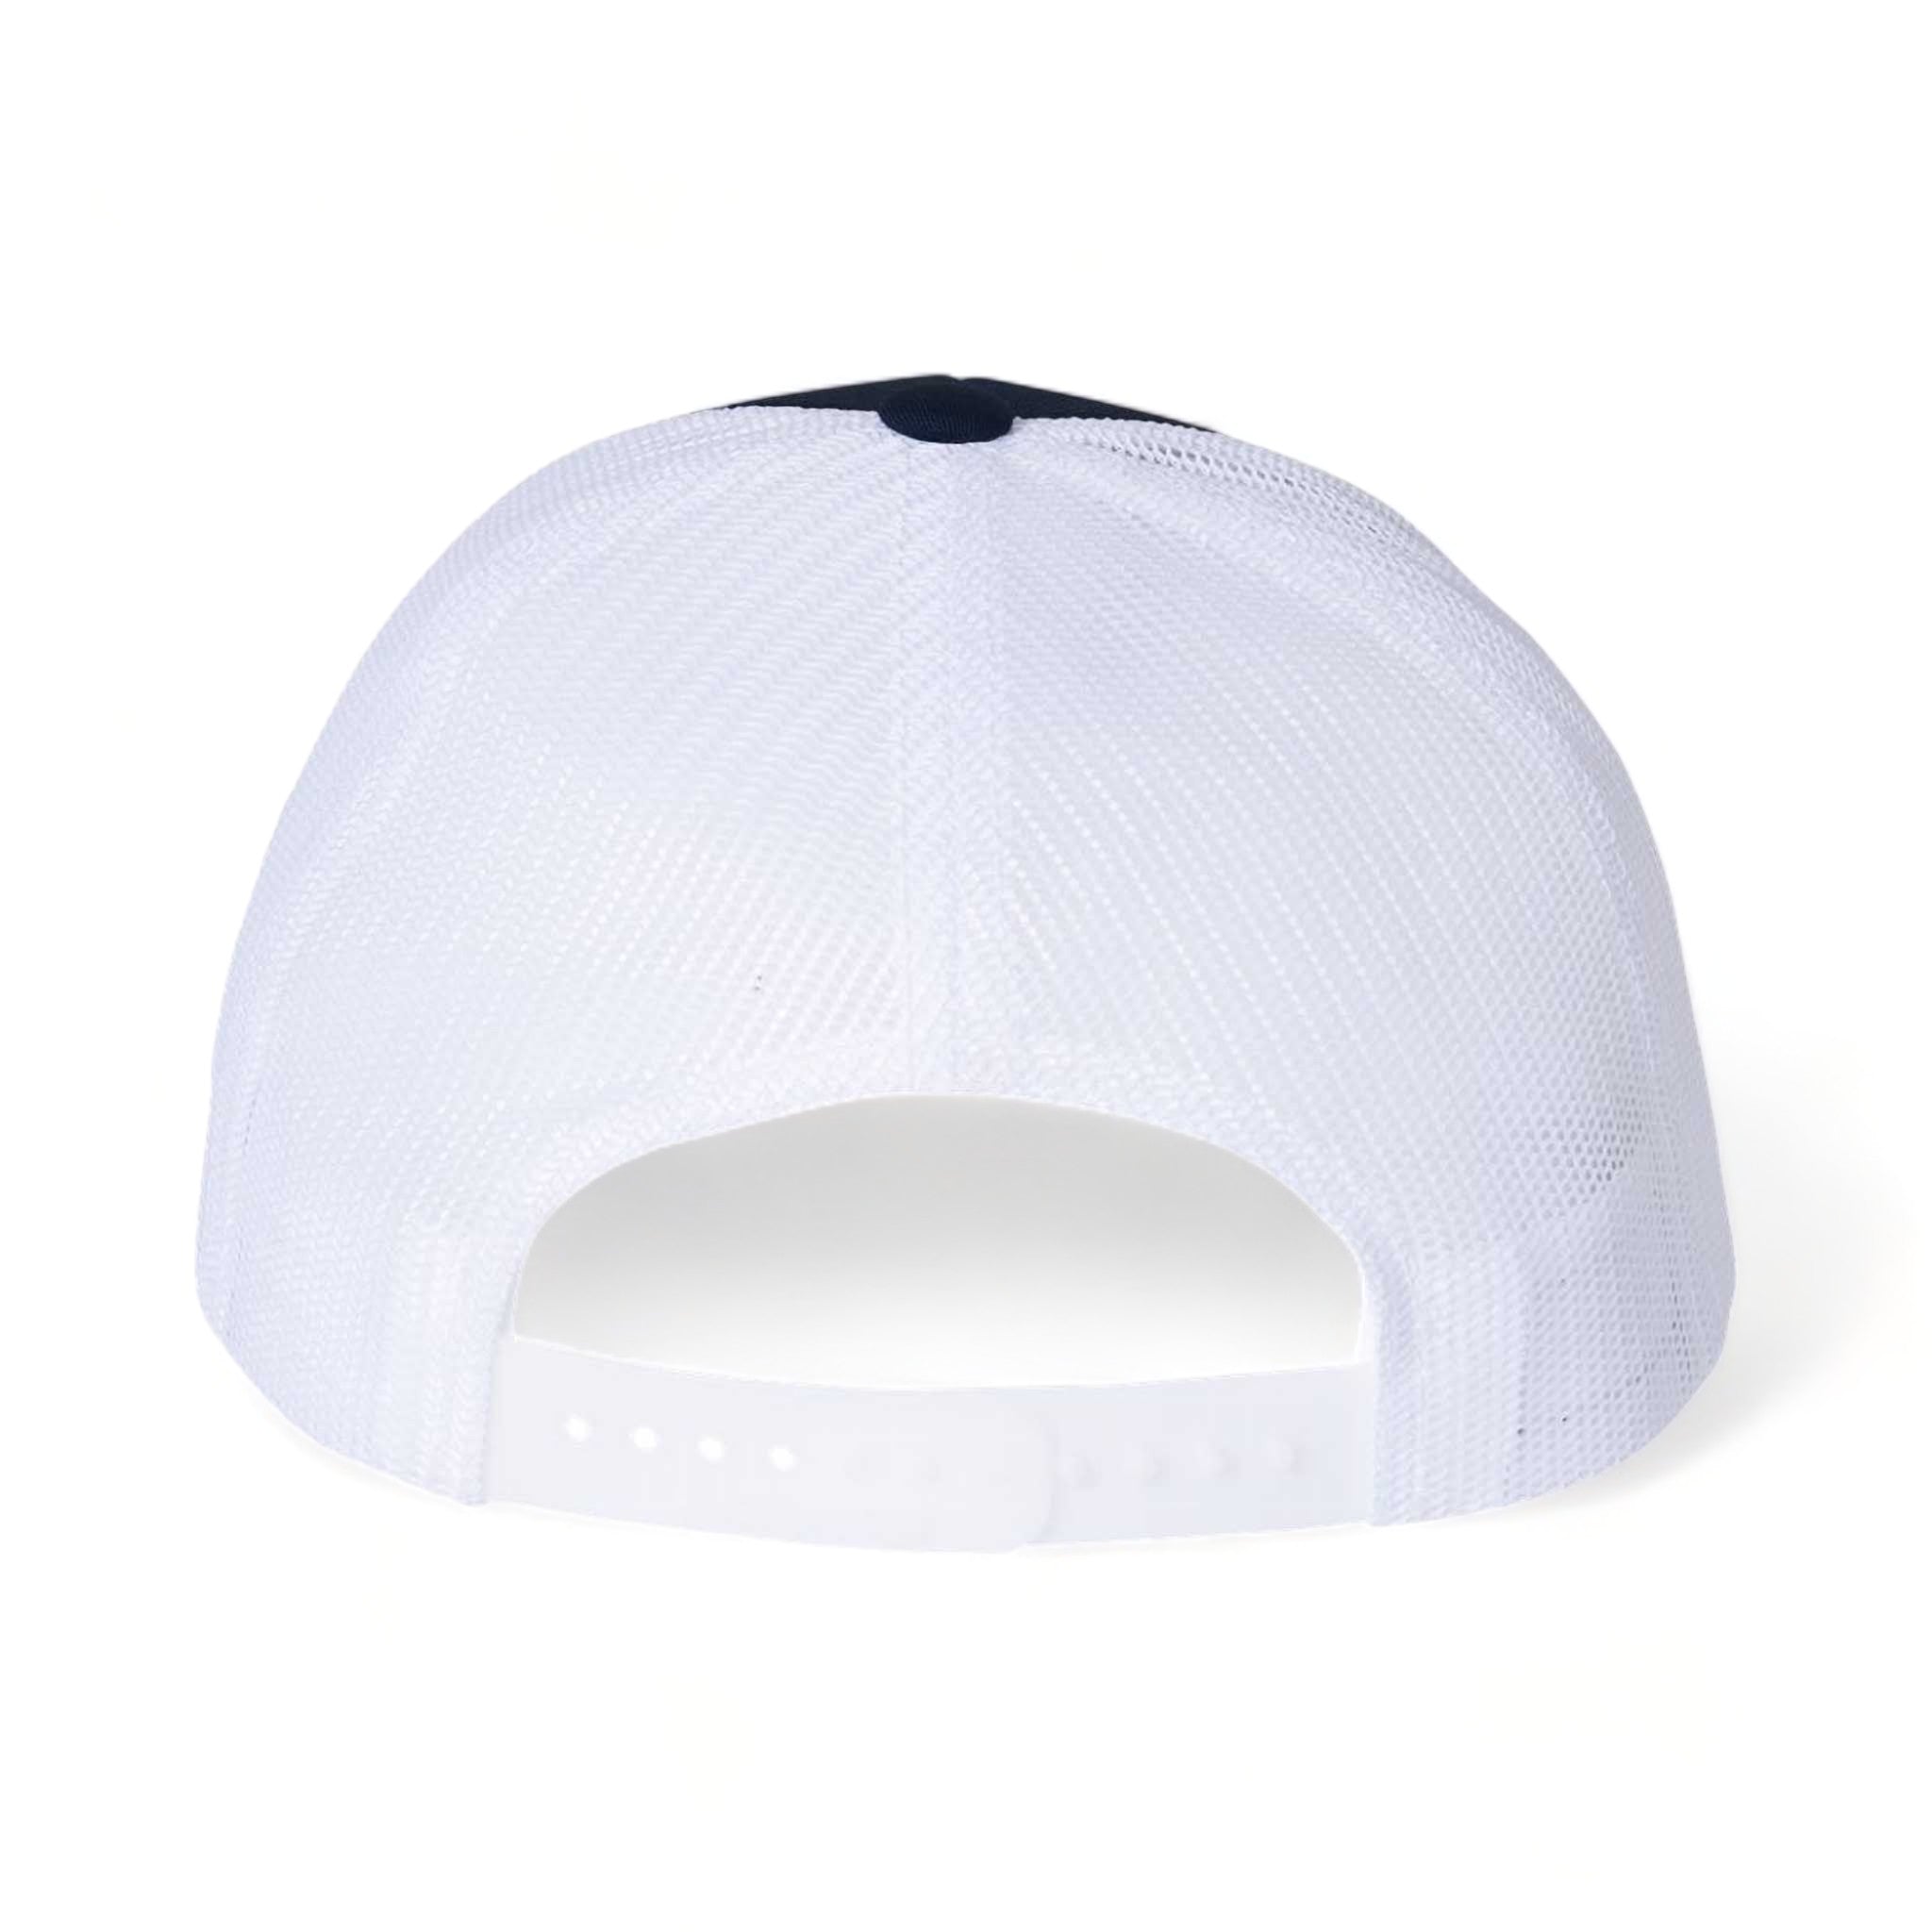 Back view of Richardson 115 custom hat in navy and  white